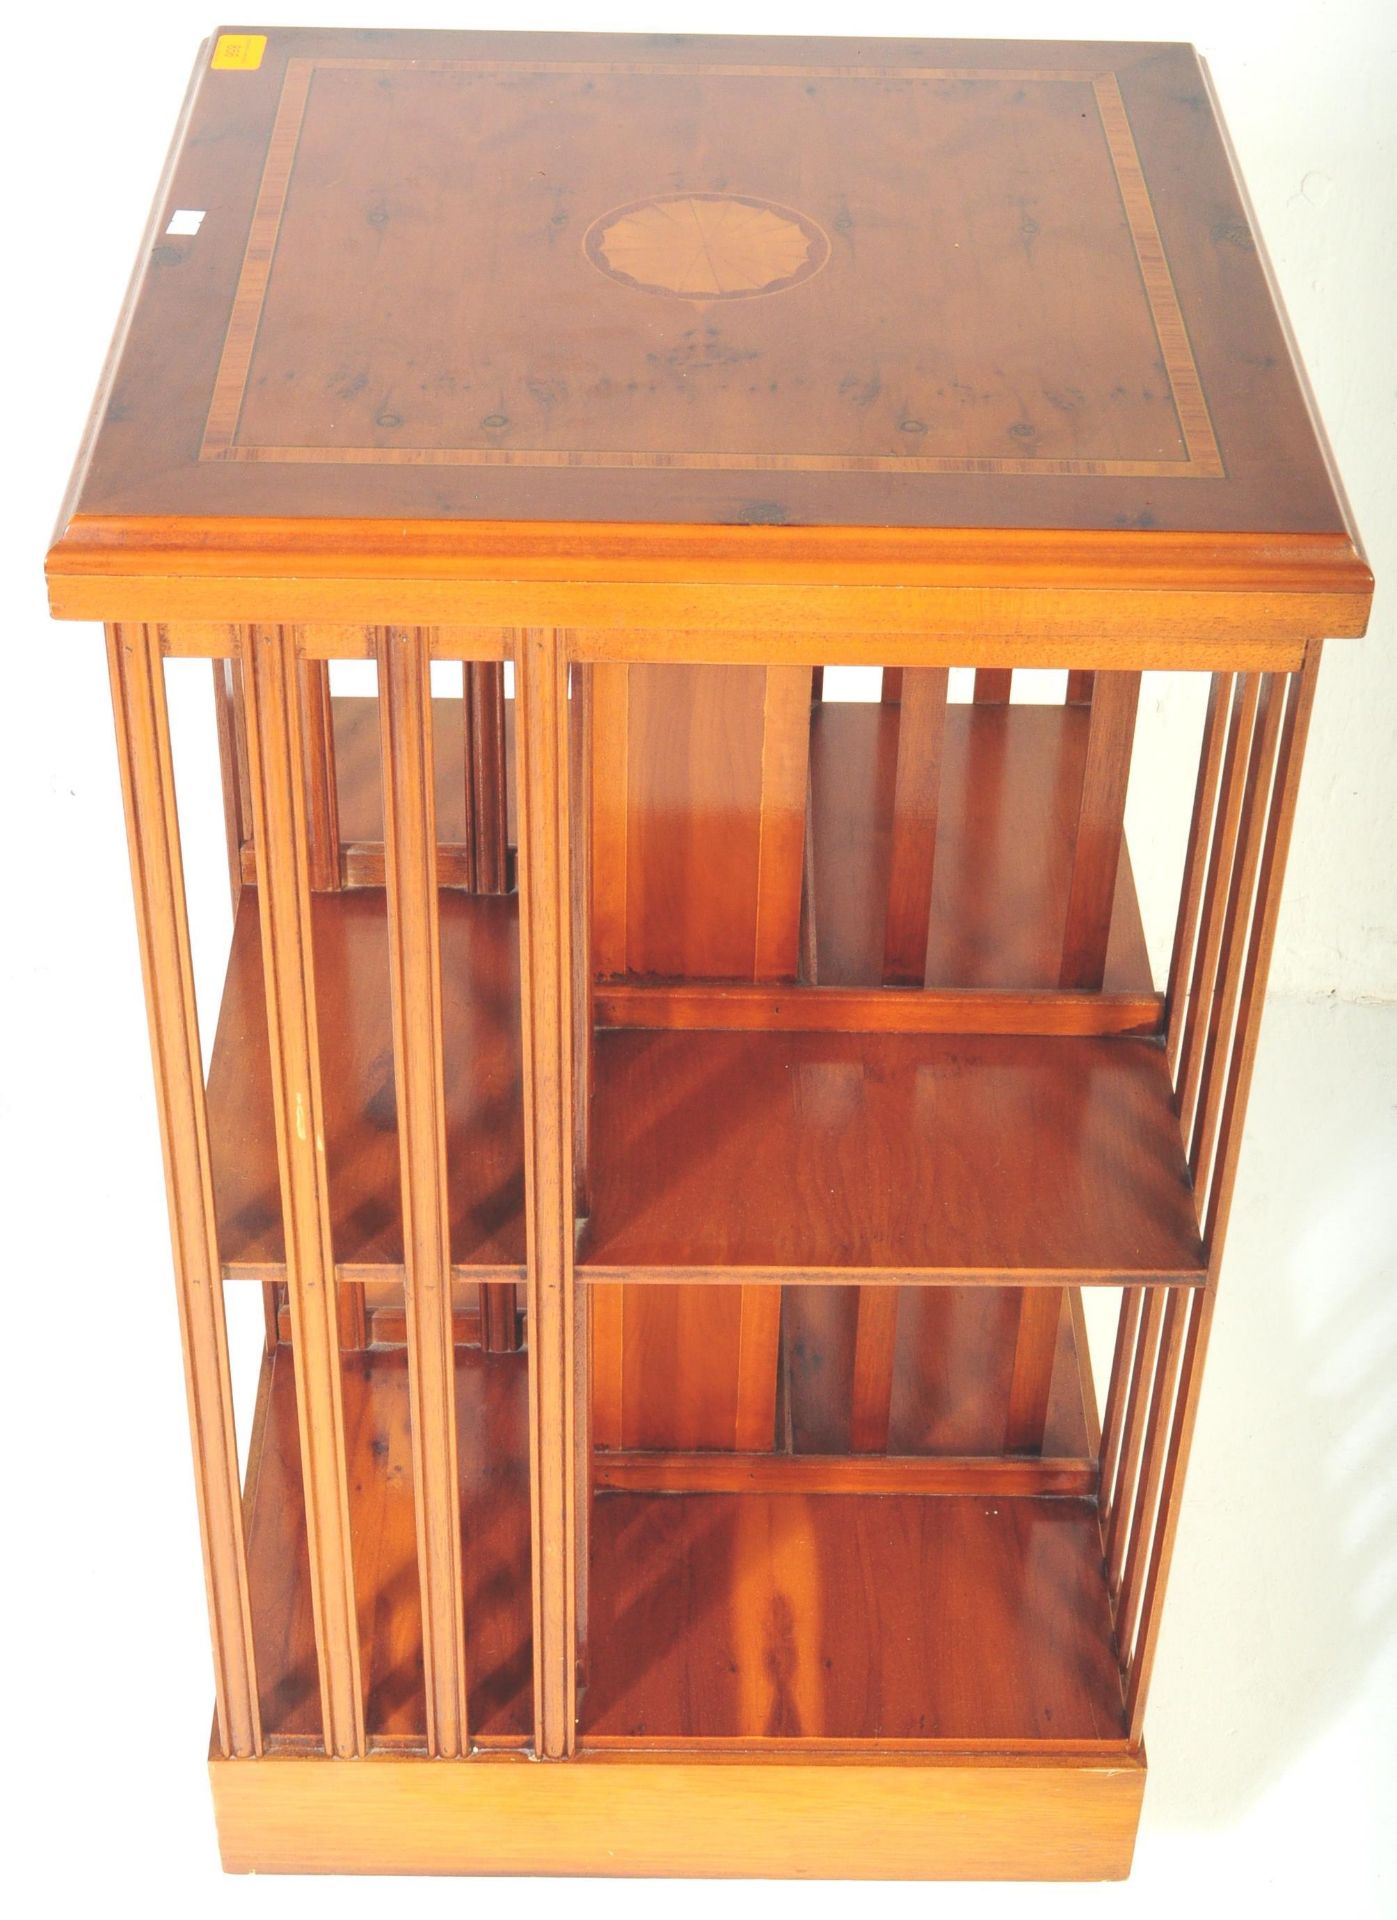 REPRODUCTION YEW WOOD INLAID REVOLVING BOOKCASE - Image 4 of 5